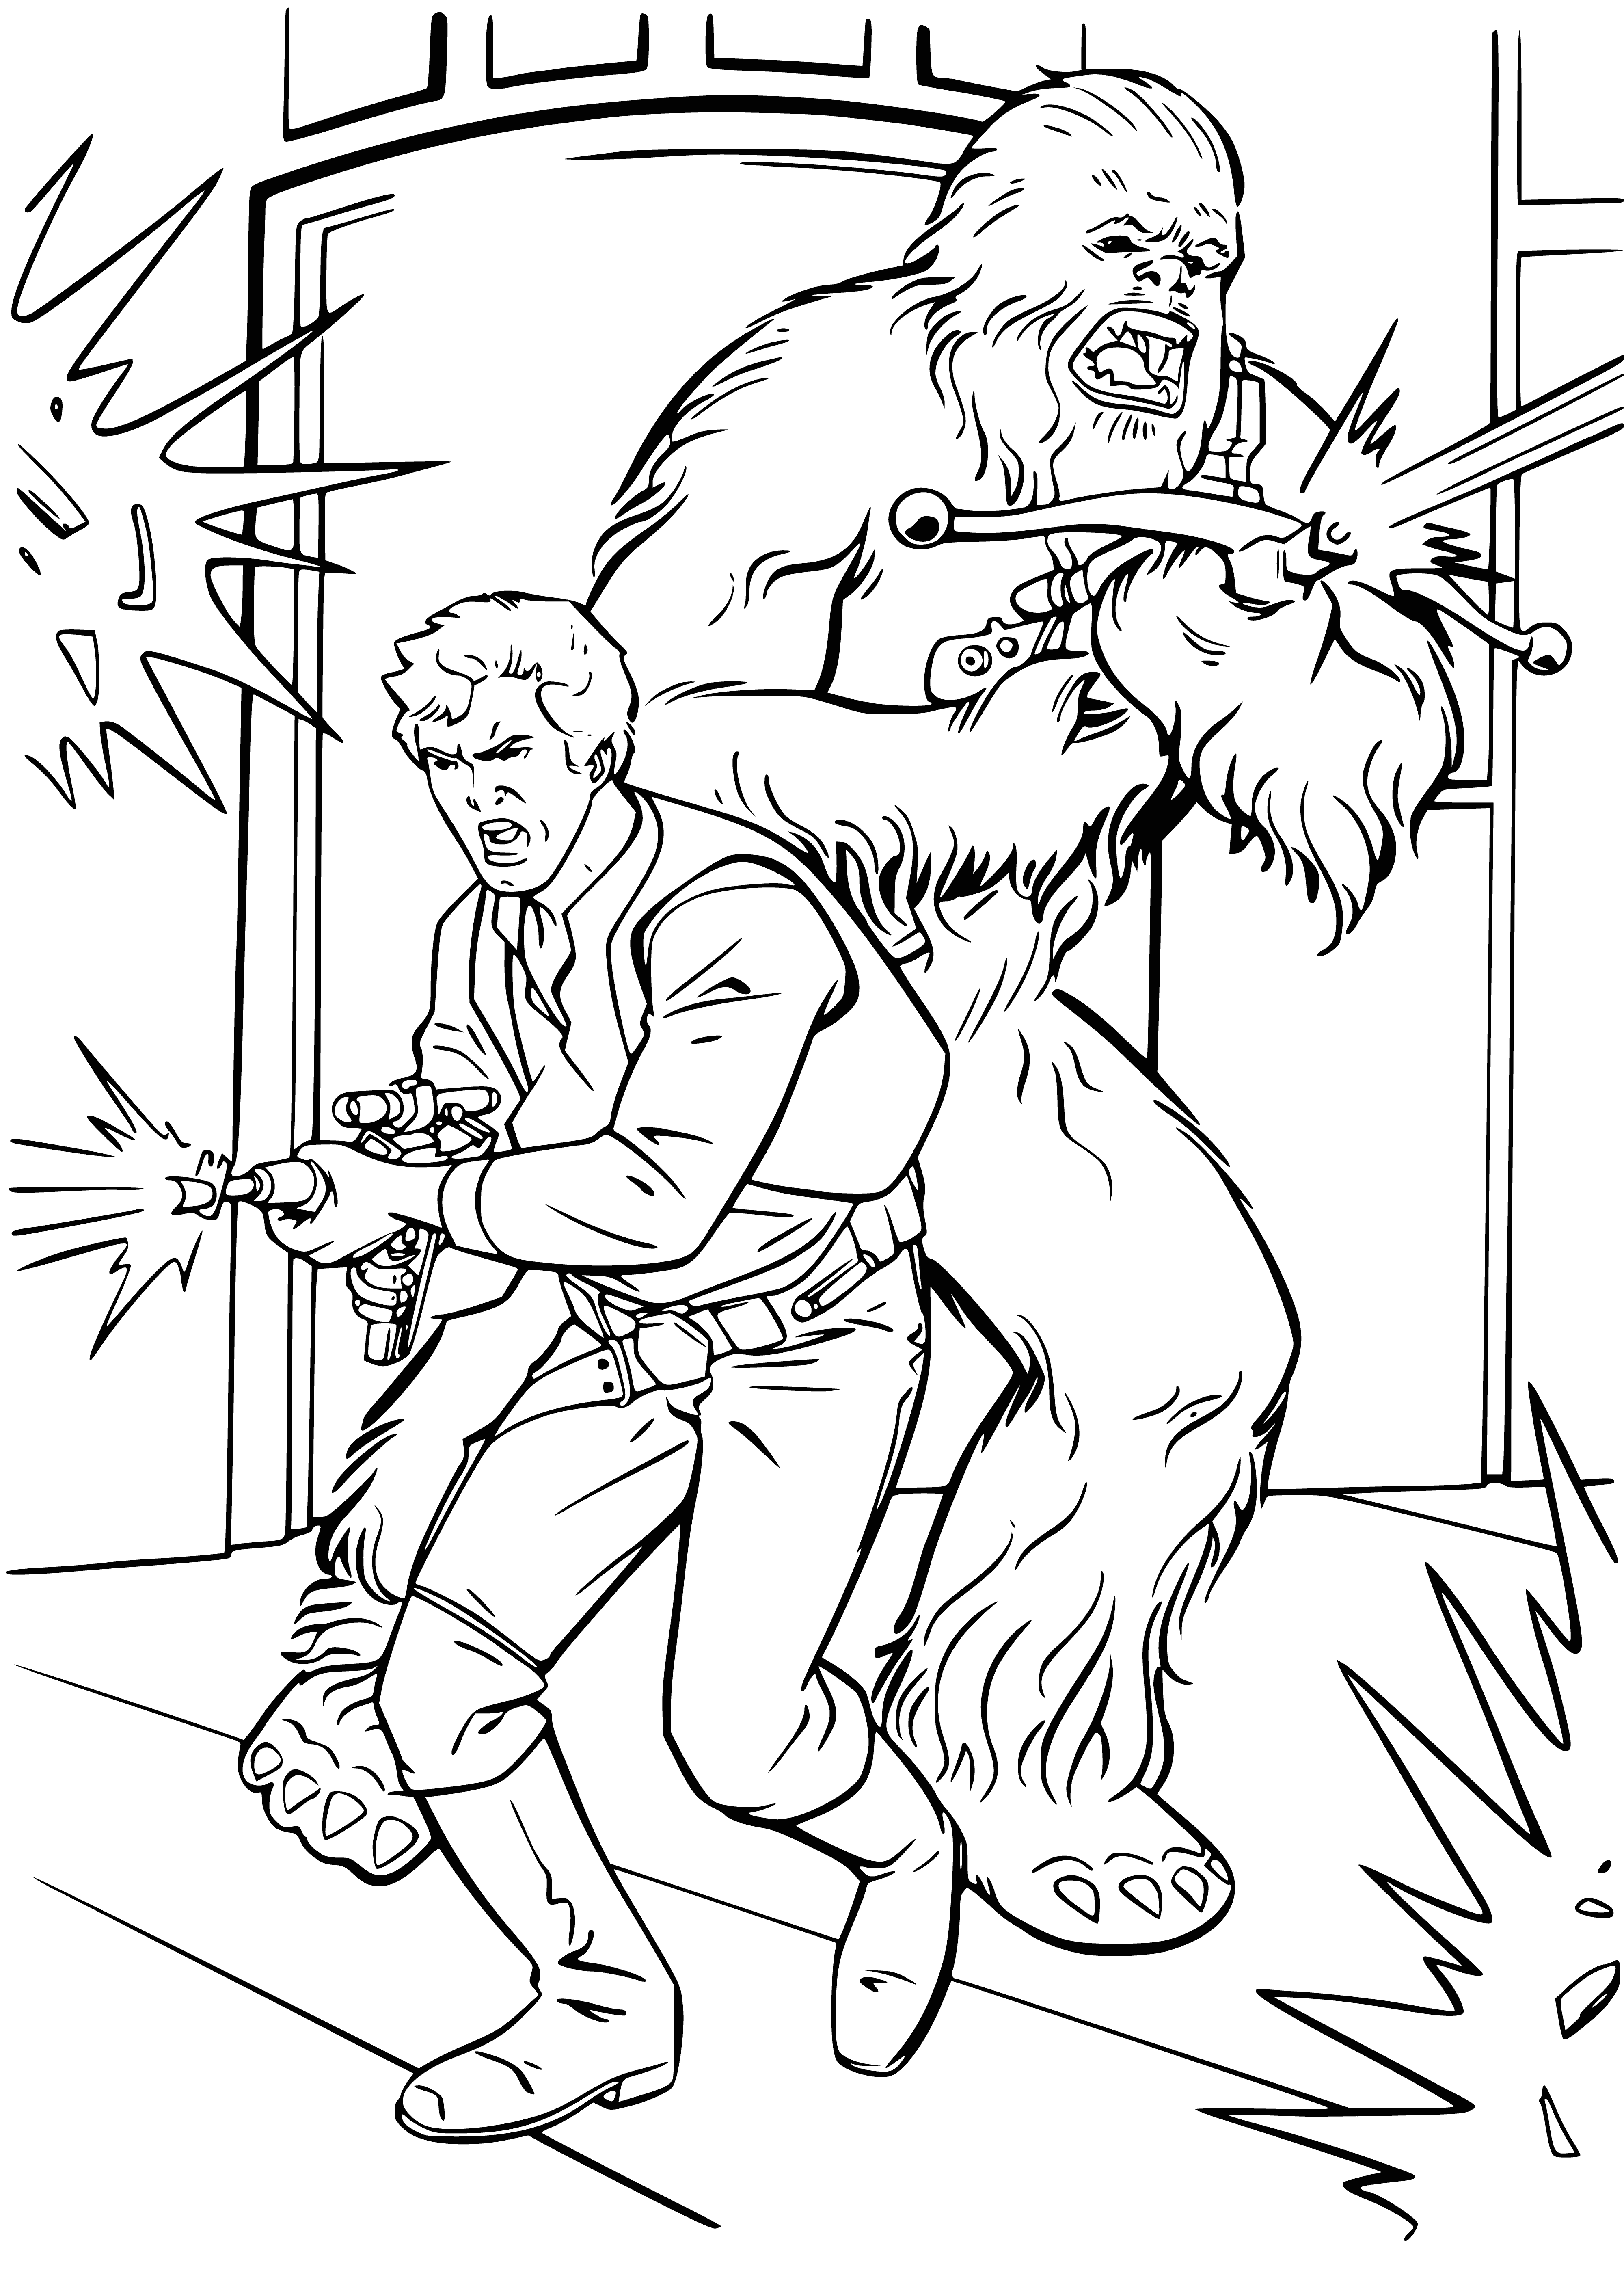 coloring page: Luke, Leia, & Chewie in a small room looking at a screen of Solo & Chubaka. #StarWars #ColoringPage